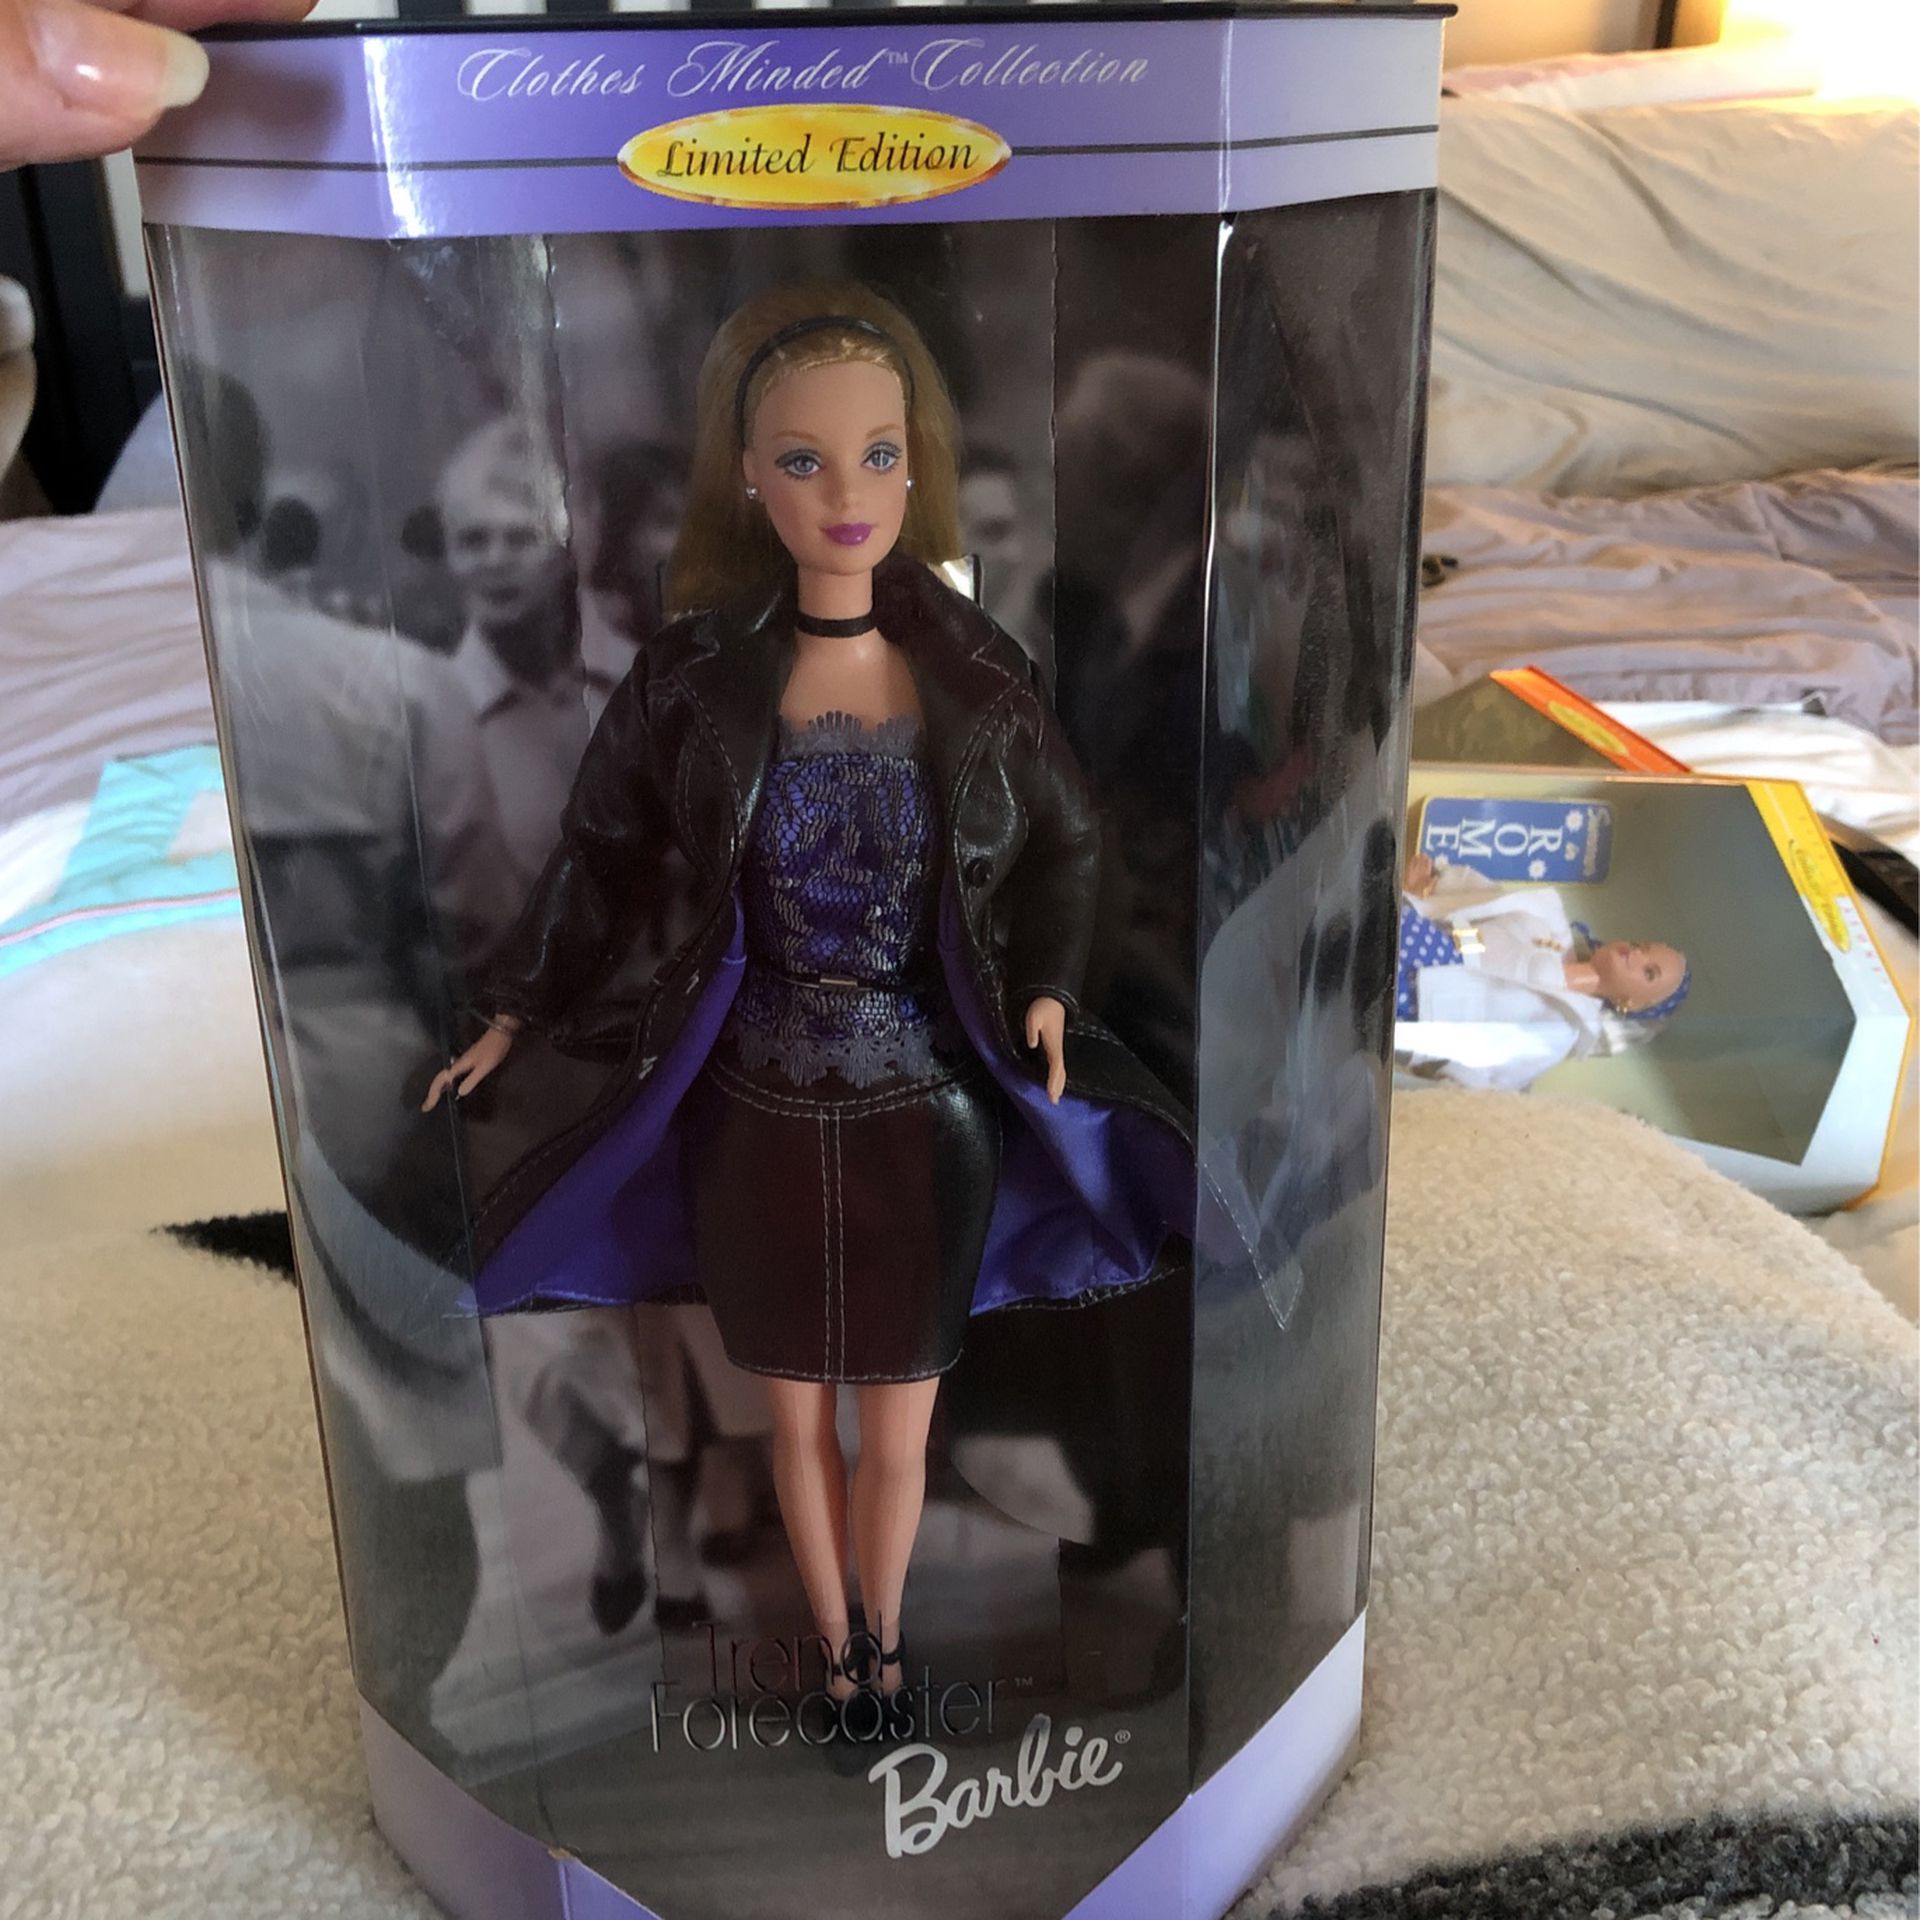 Barbie trend forecoaster Limited  addition close minded collection